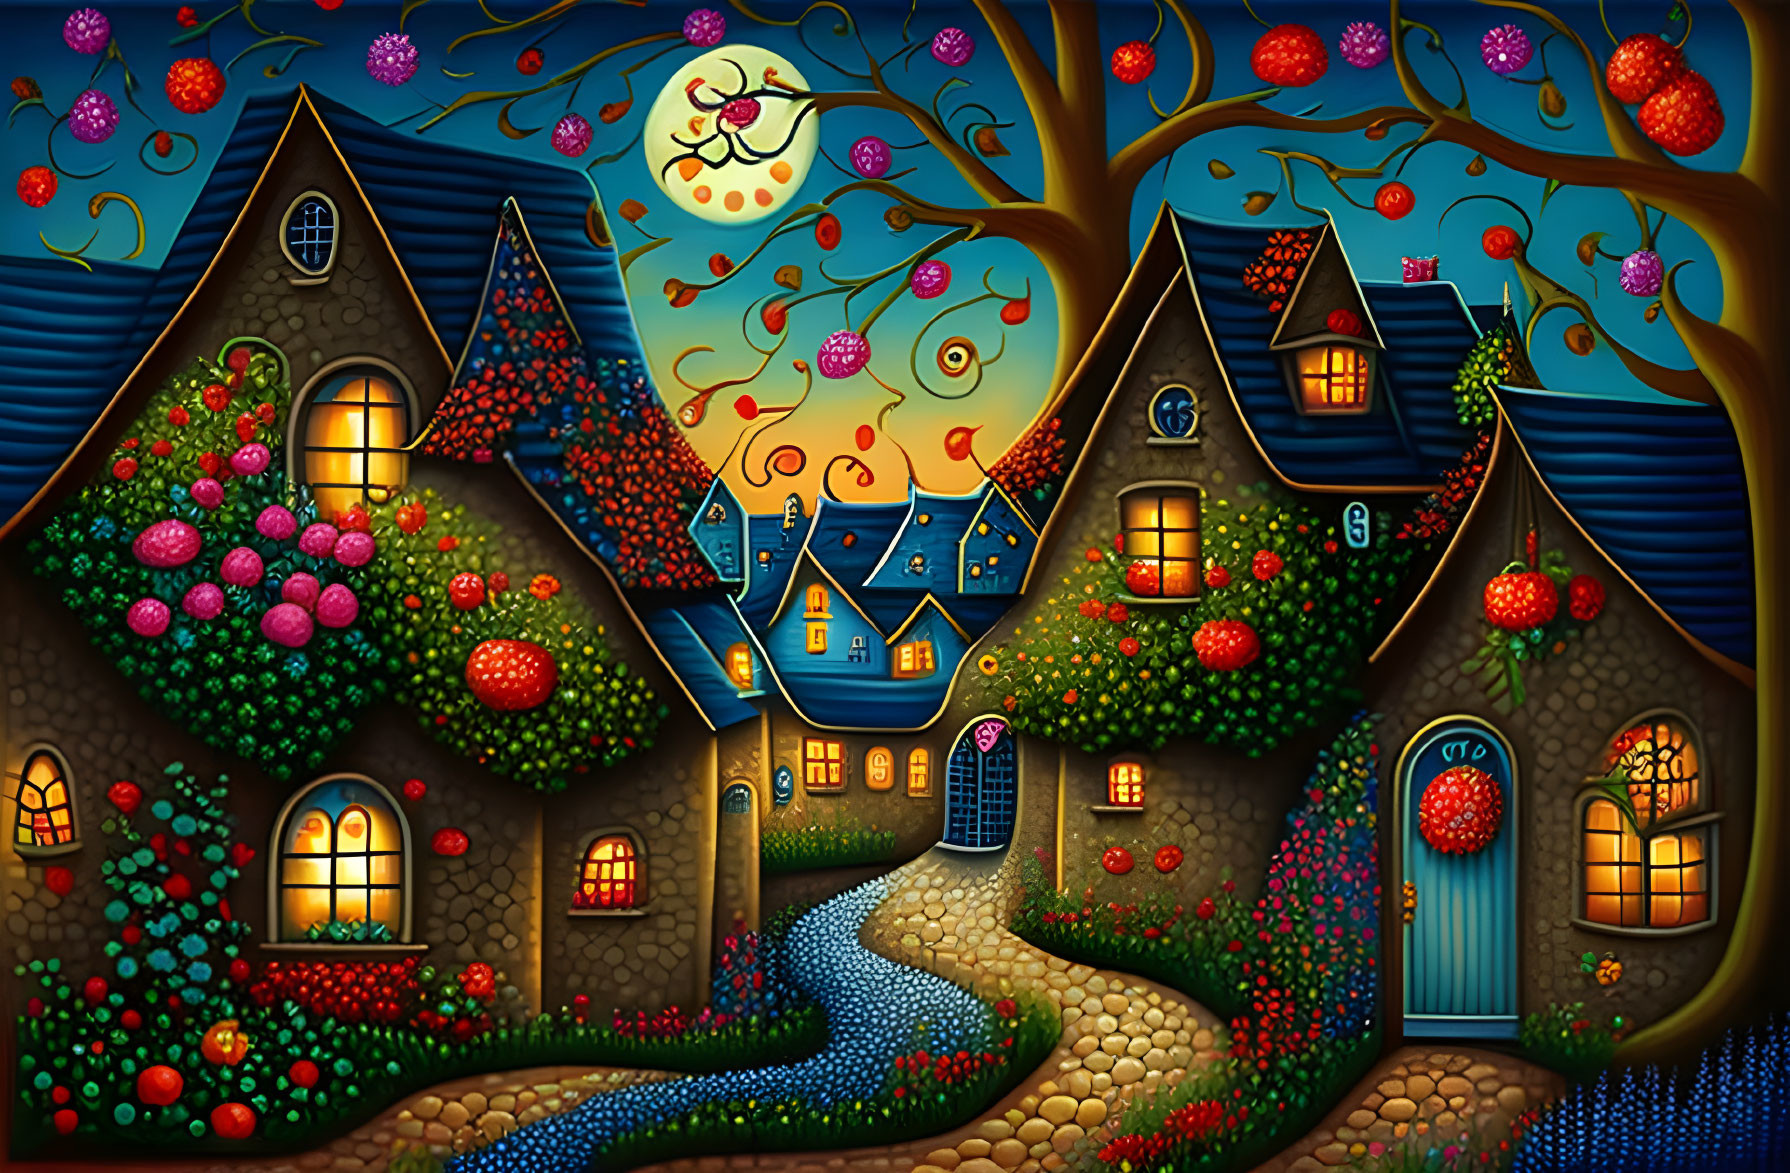 Colorful painting of vibrant, curvy houses and flora under a smiling crescent moon